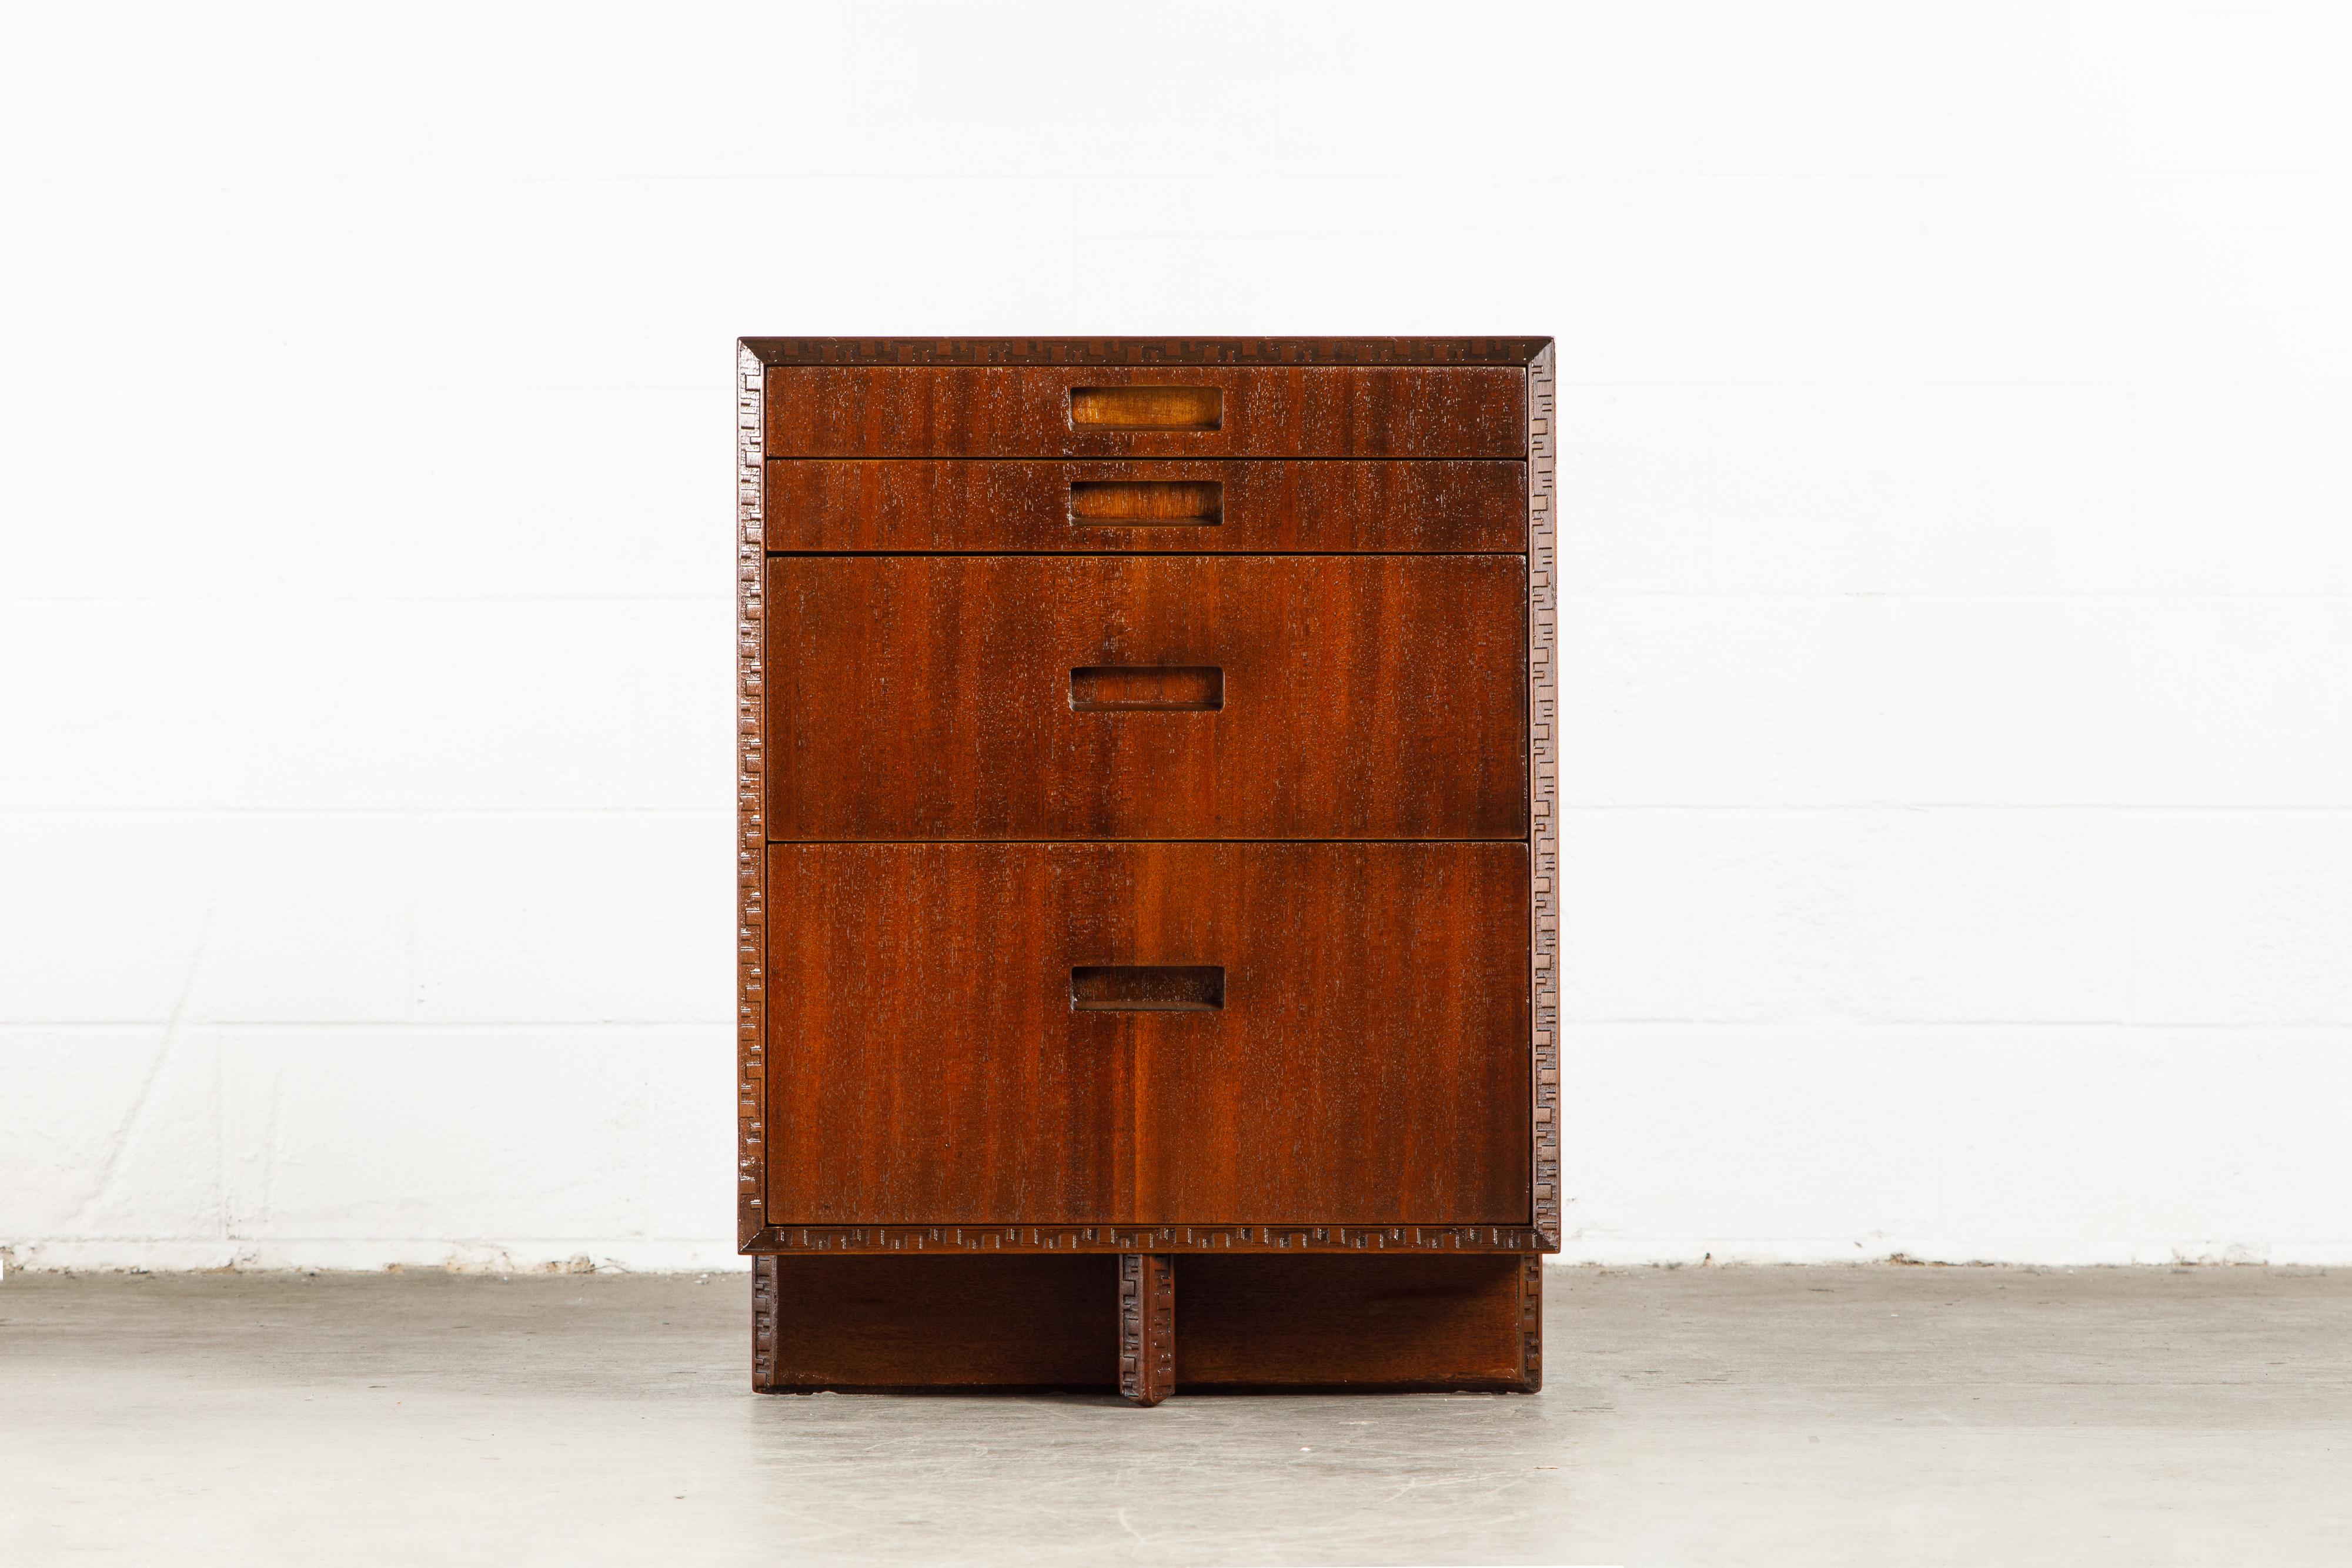 American 'Taliesin' Mahogany Chest of Drawers by Frank Lloyd Wright, 1955, Signed